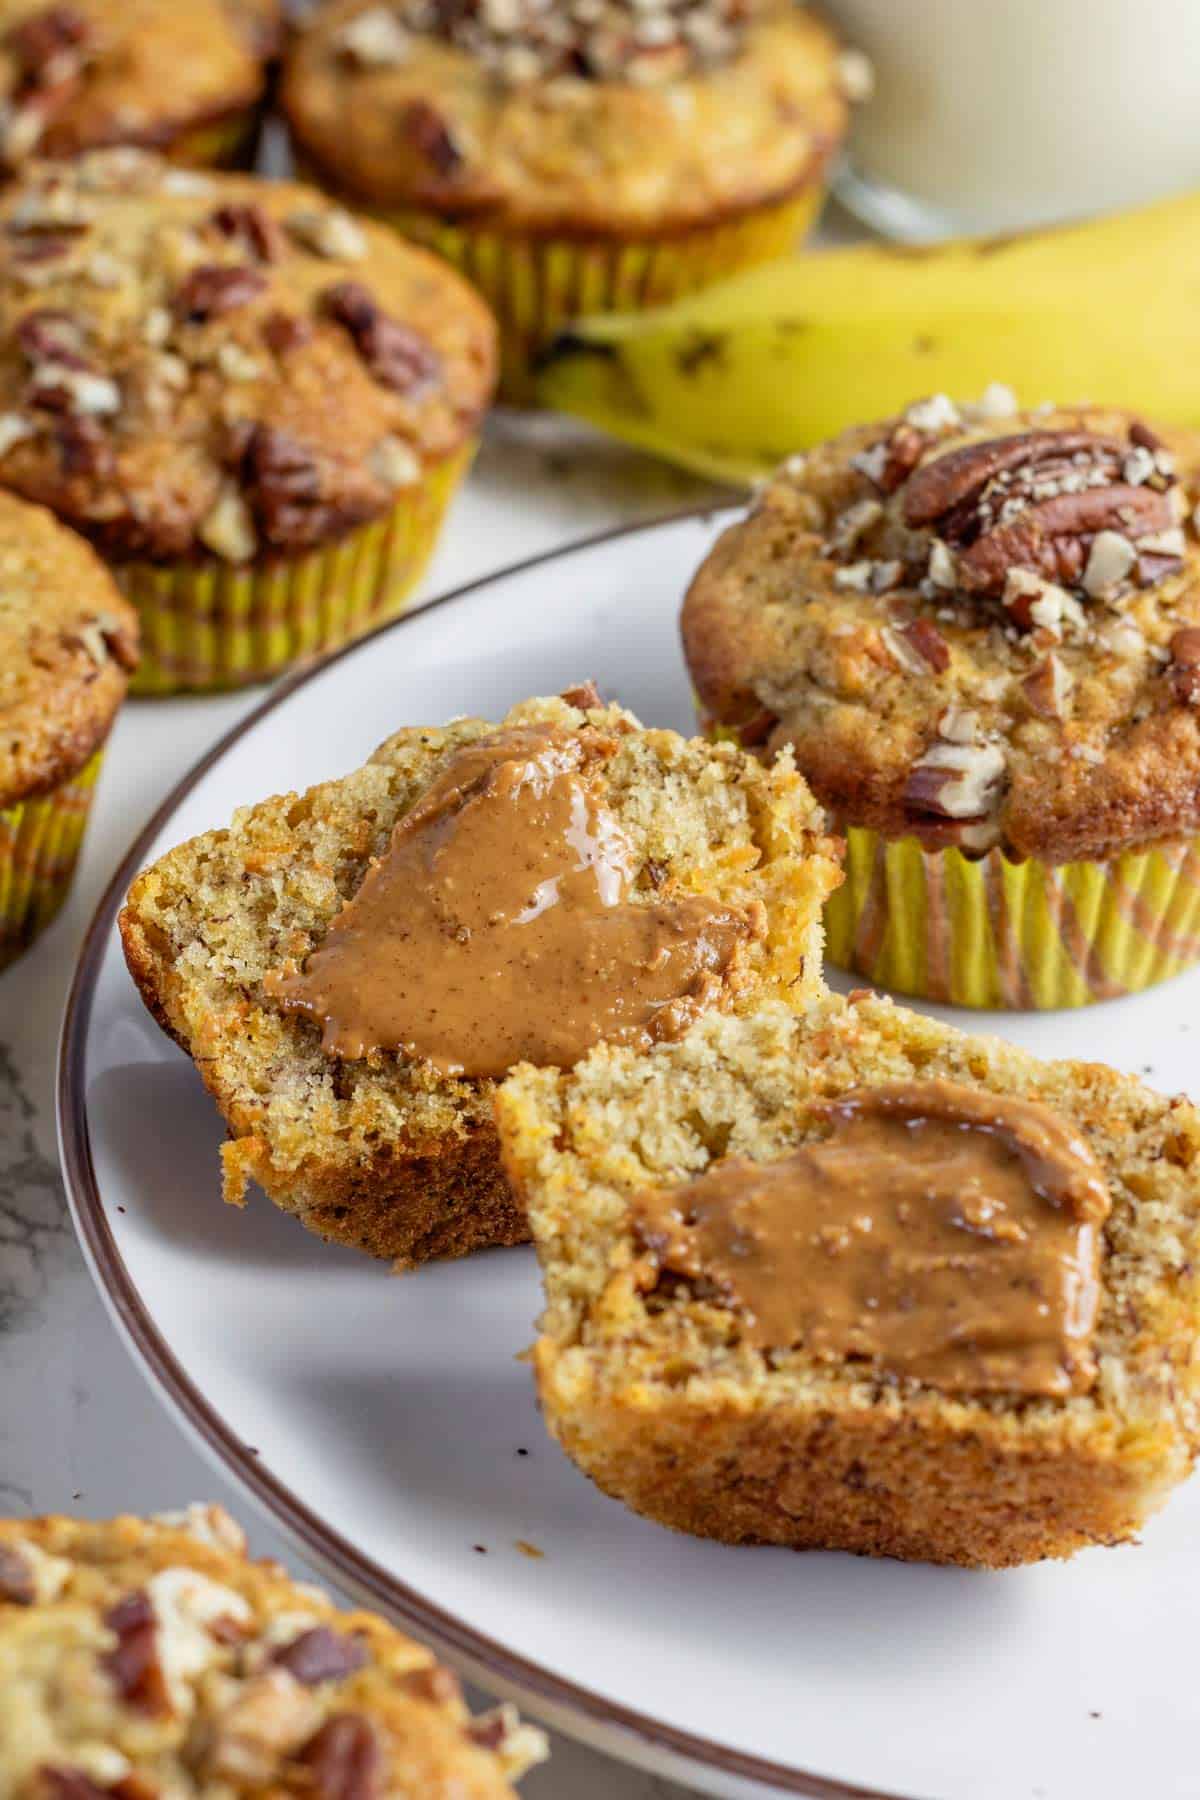 Carrot banana muffins with nuts and peanut butter spread.